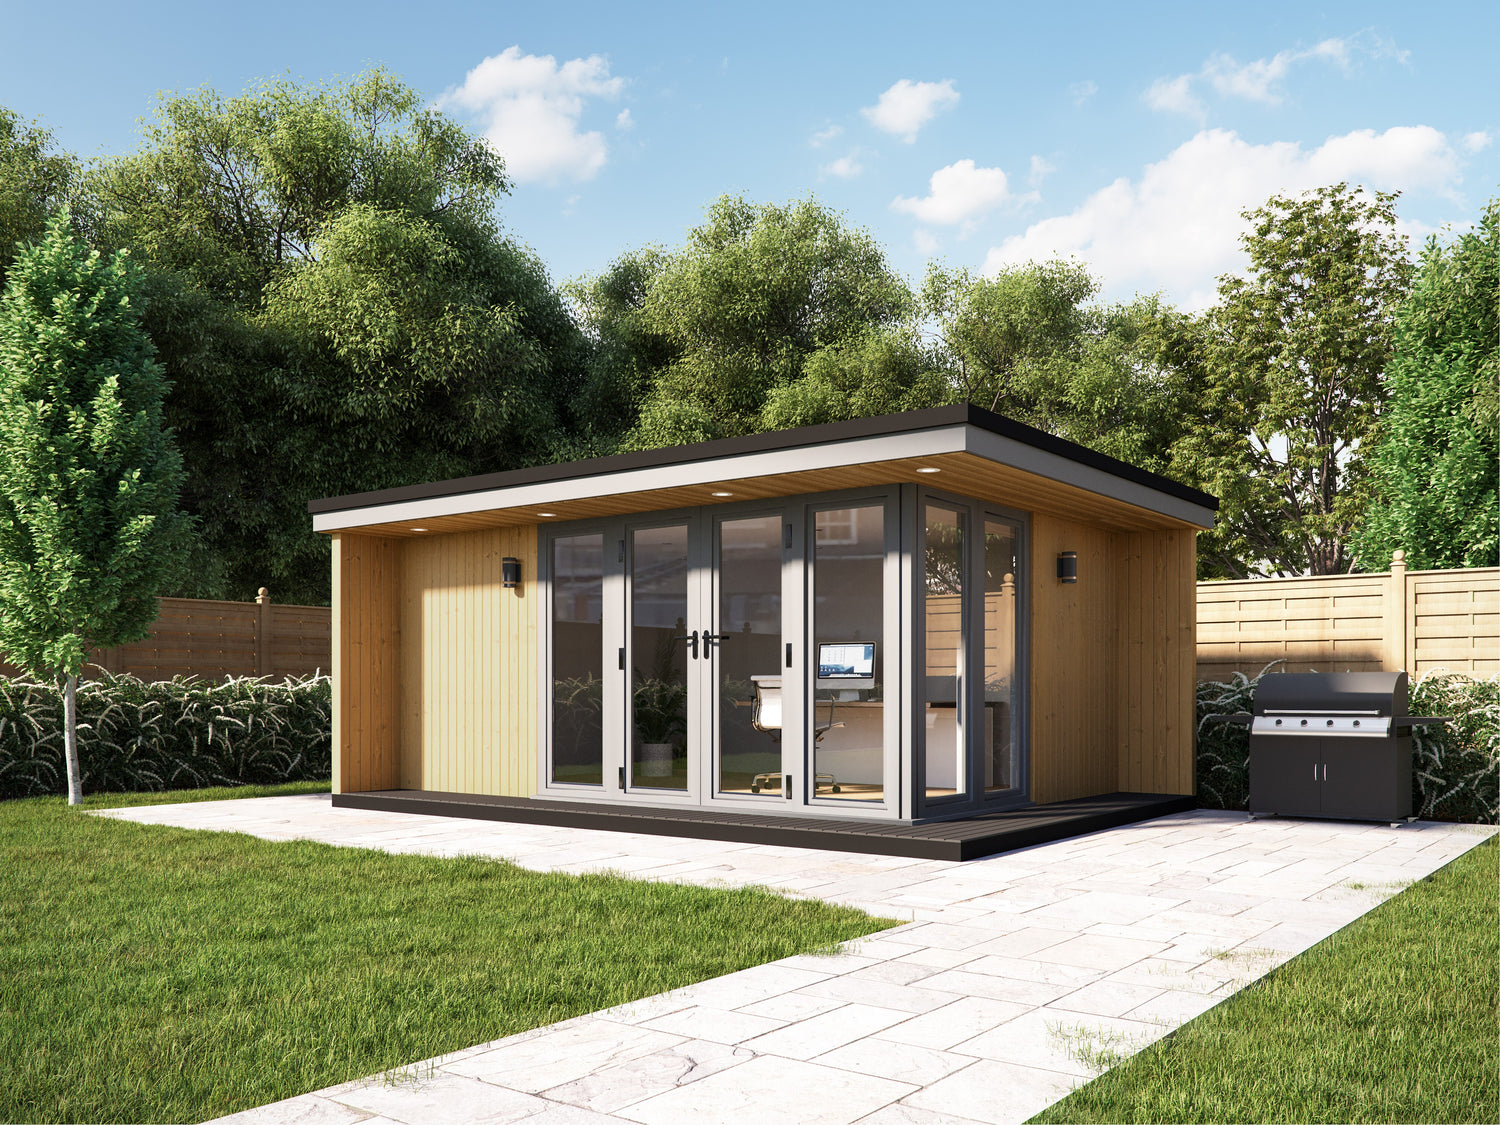 A rendering of a small garden room office.